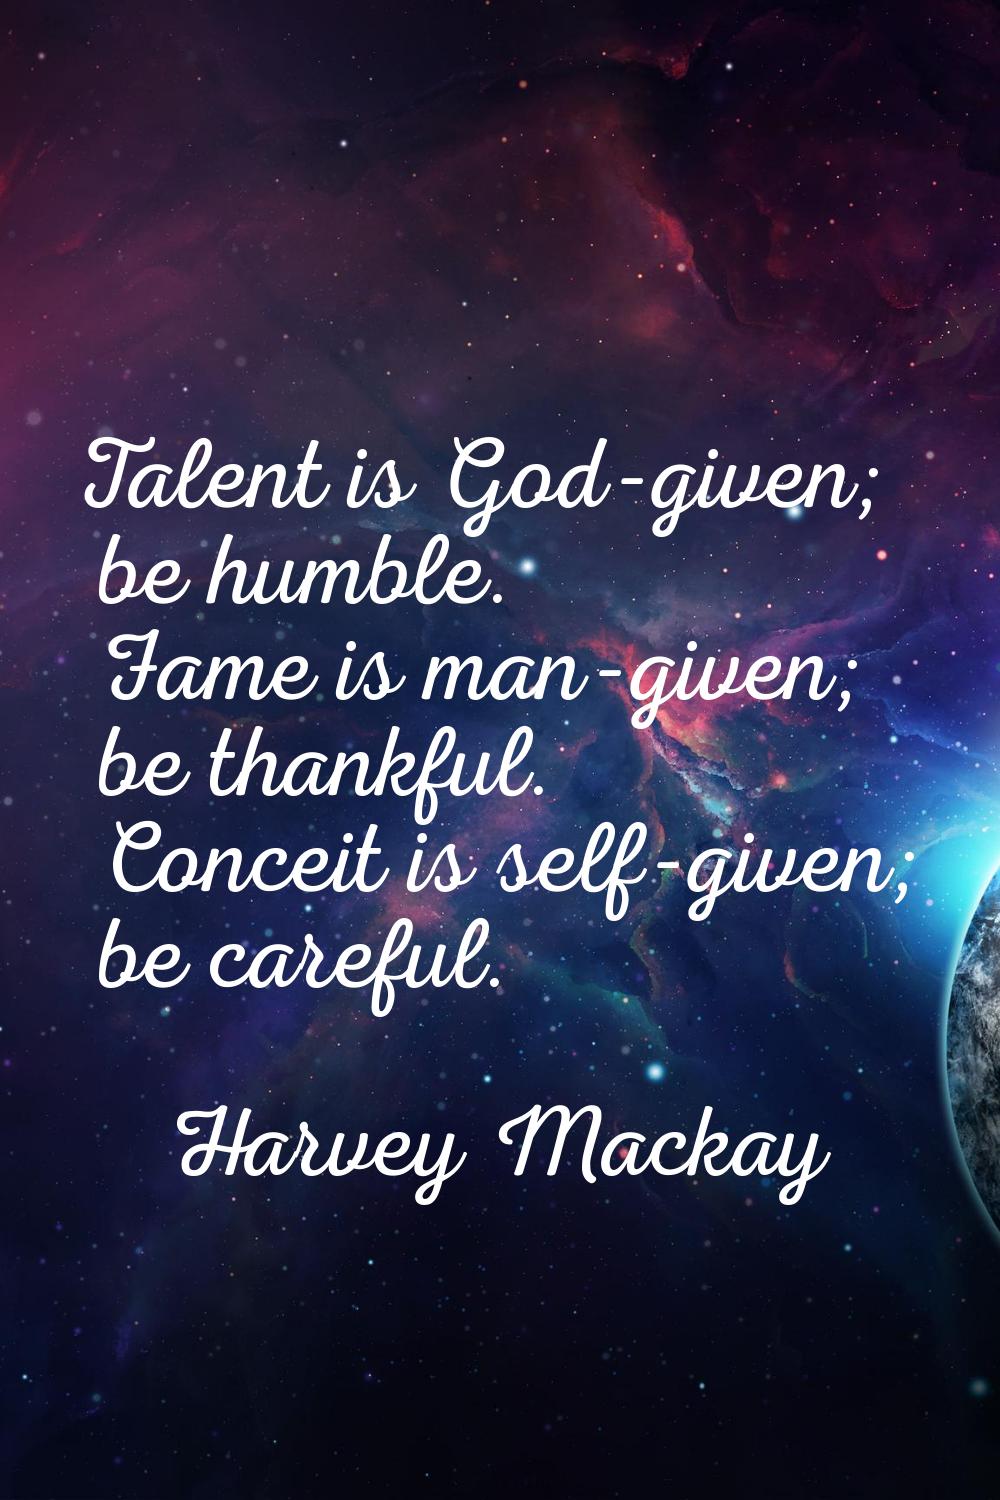 Talent is God-given; be humble. Fame is man-given; be thankful. Conceit is self-given; be careful.